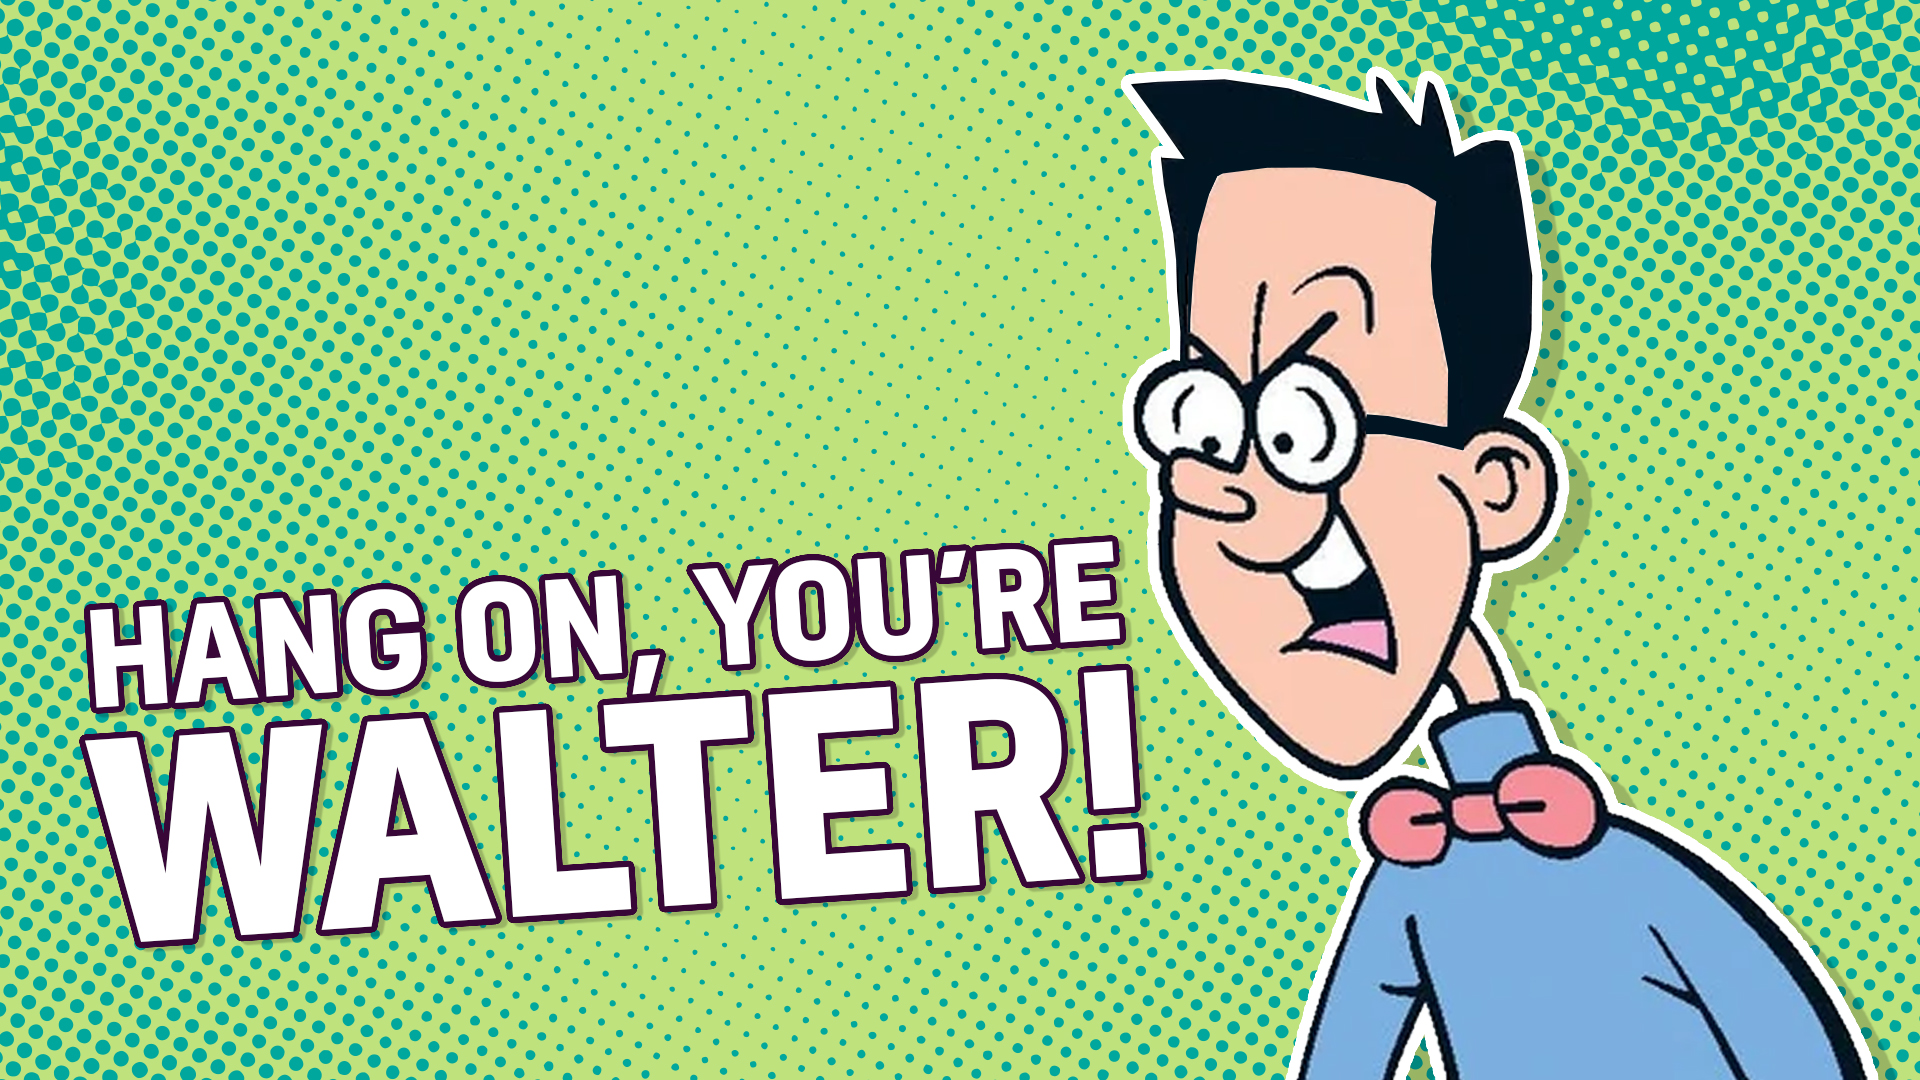 Hang on, you're Walter! Did you think you could get into Dennis' party by answering a few questions correctly?